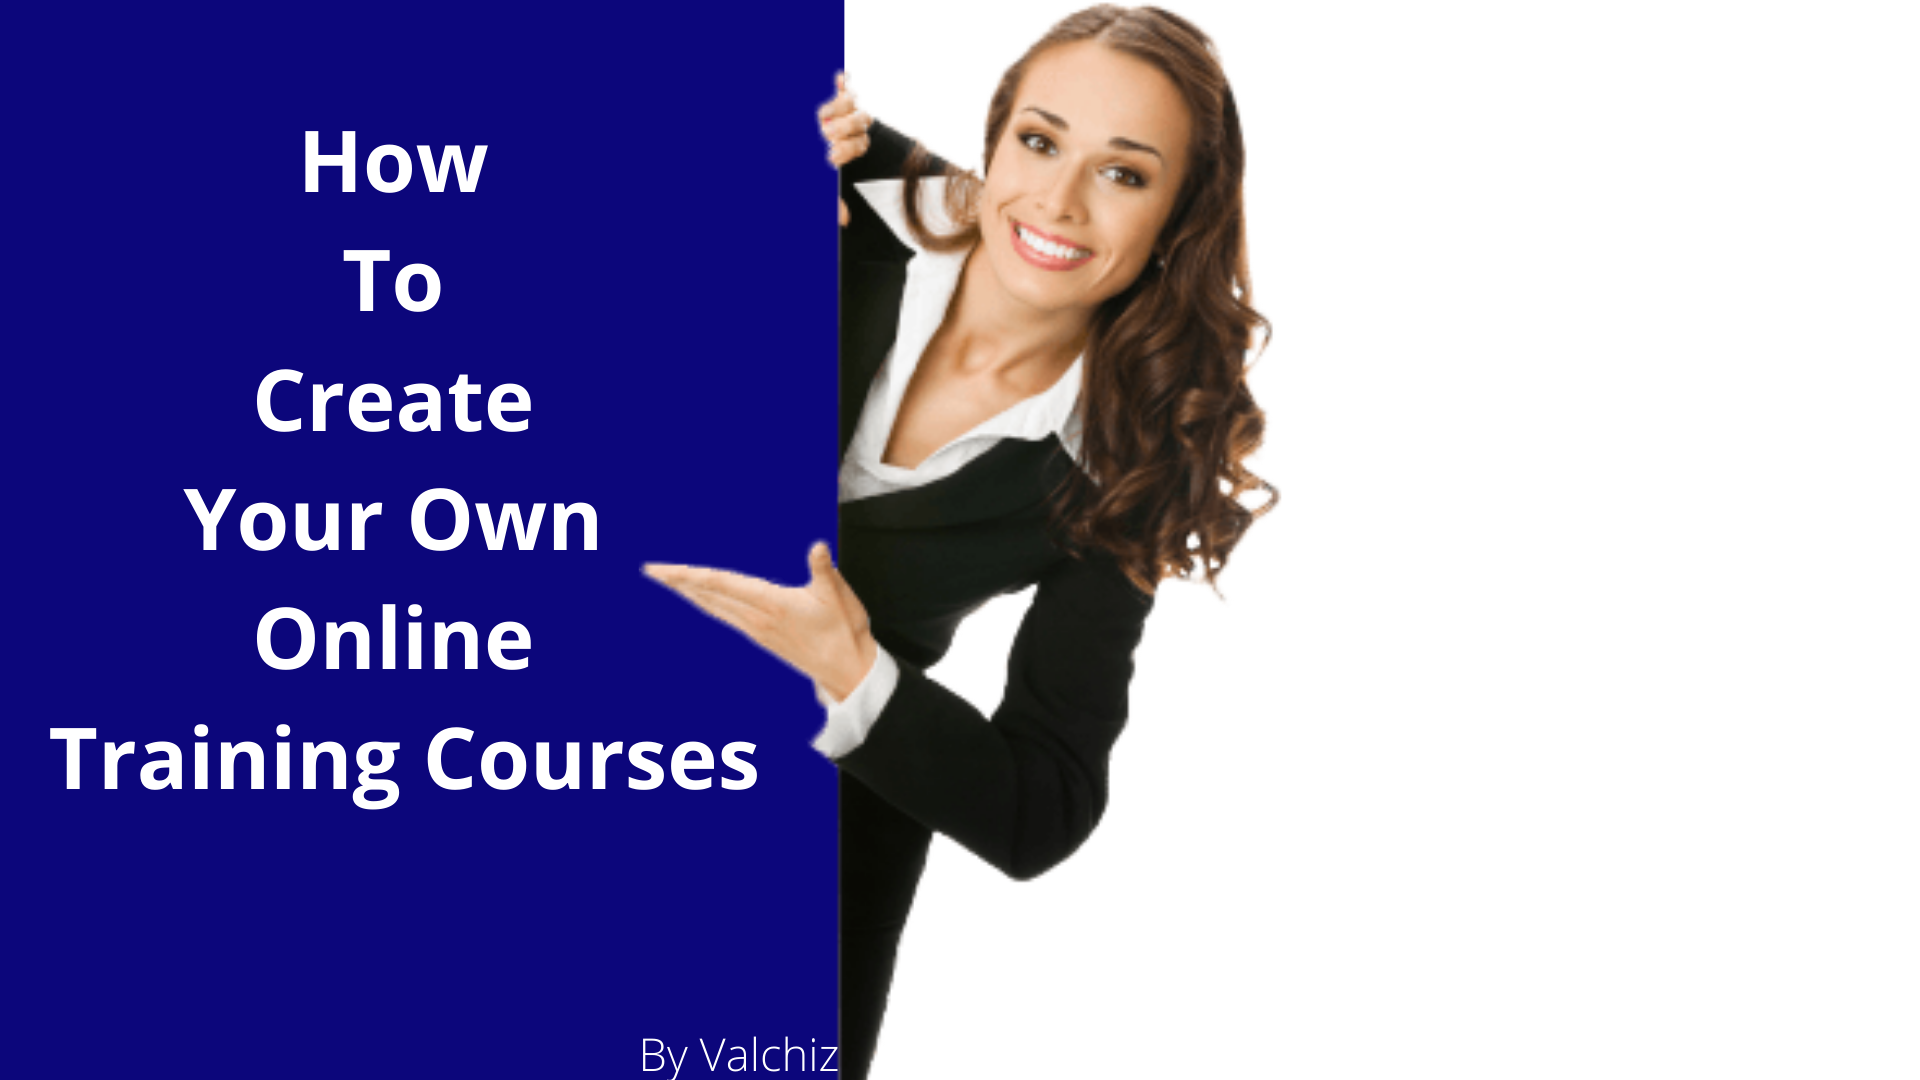 How To Create Your Own Online Training Courses.png